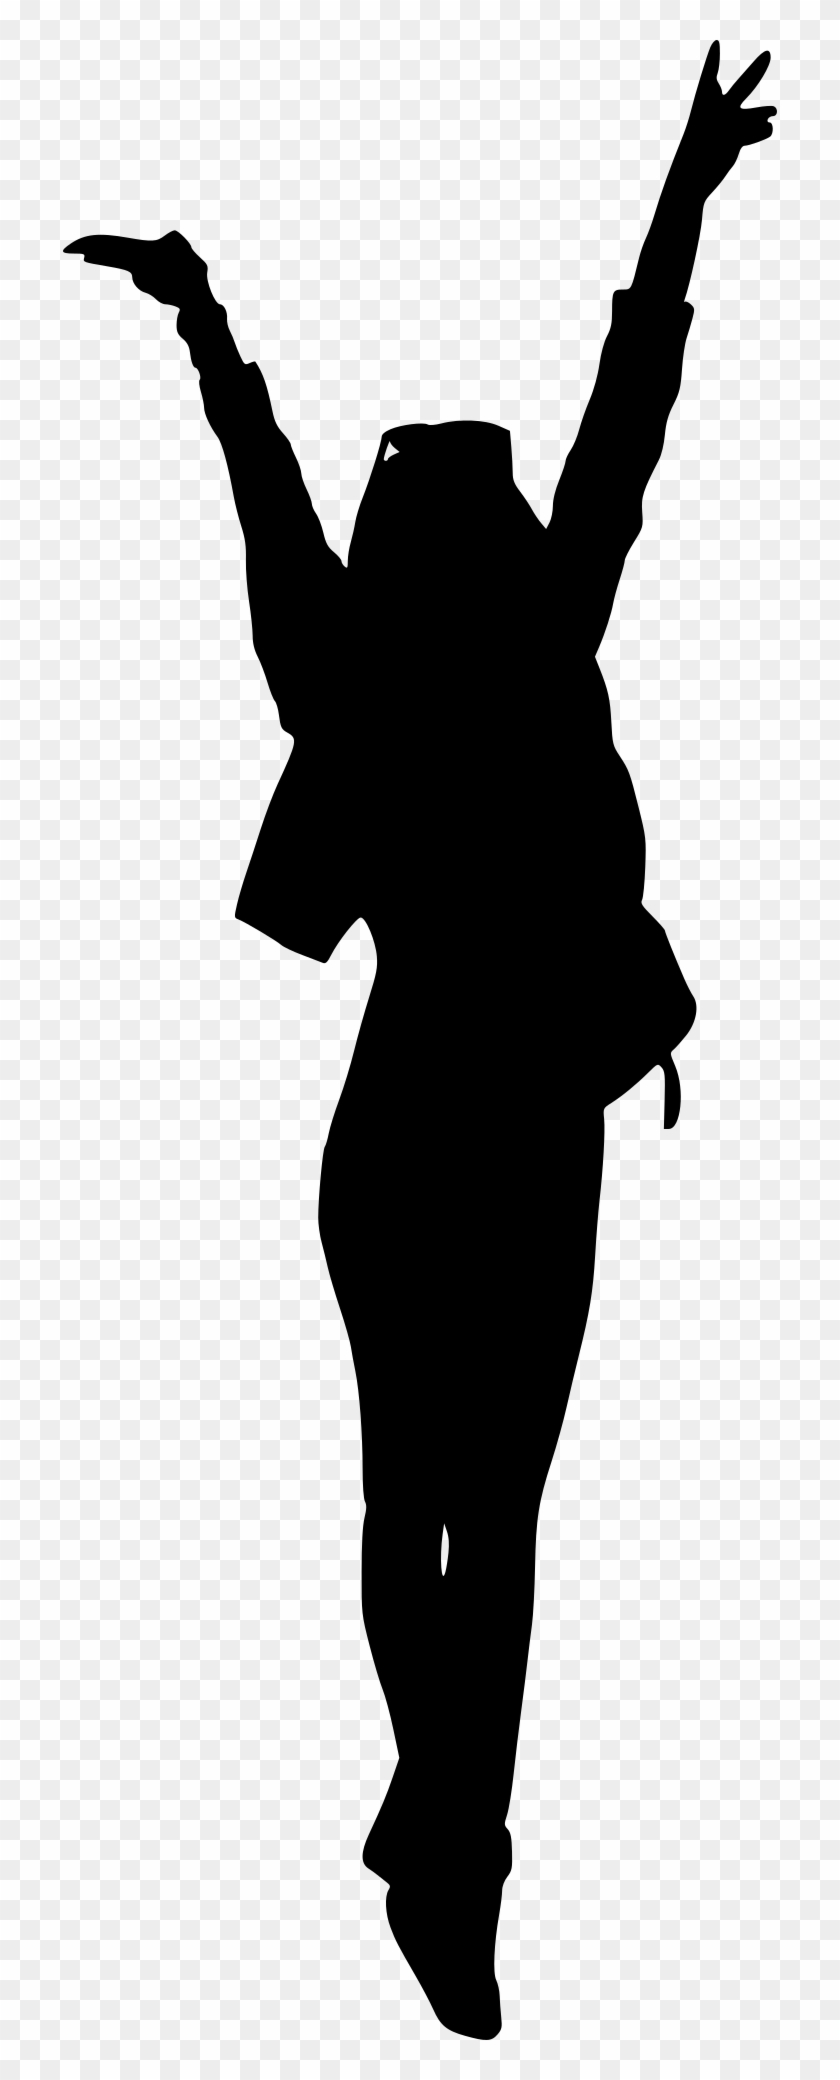 Free Download - Woman Hands Up Silhouette #1710861